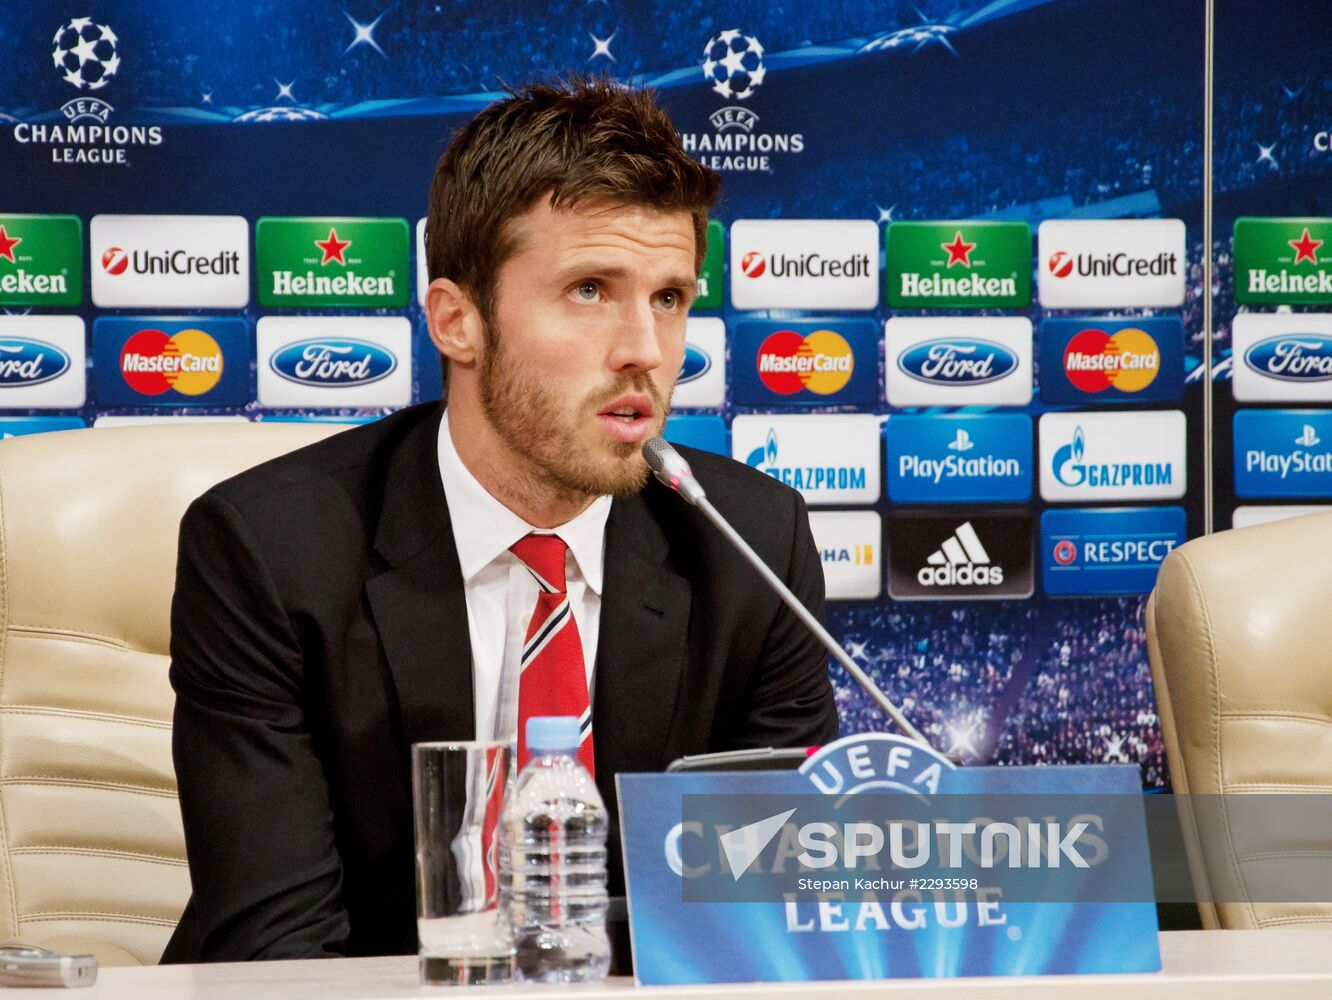 Football. News conference by FC Manchester United